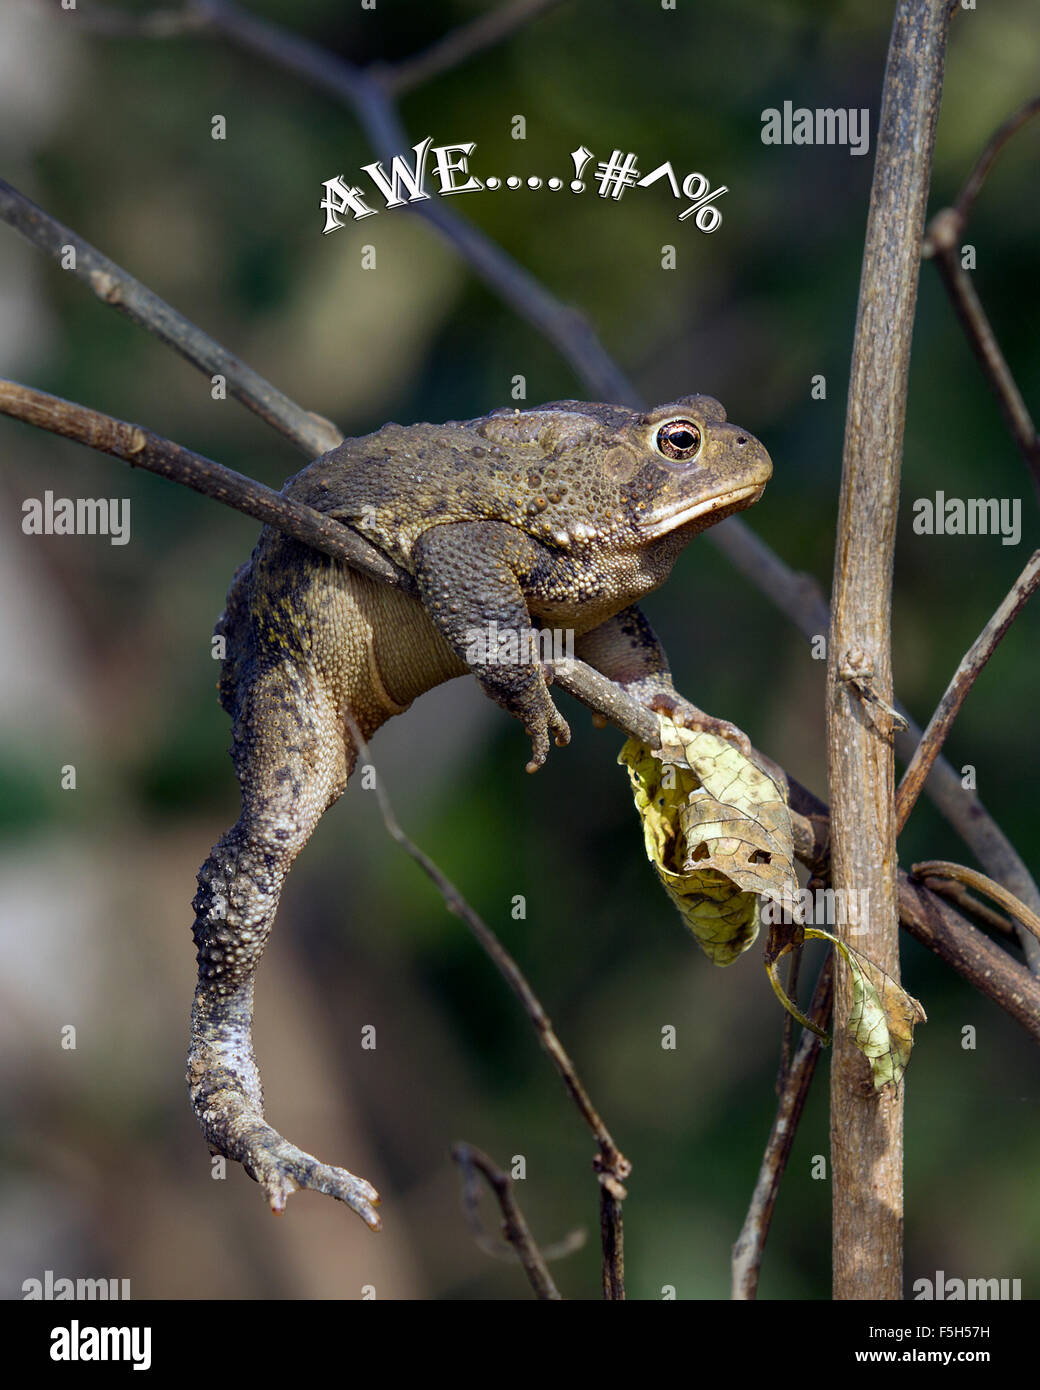 I found this Toad caught in the fork of some branches which made for some great pictures. Stock Photo